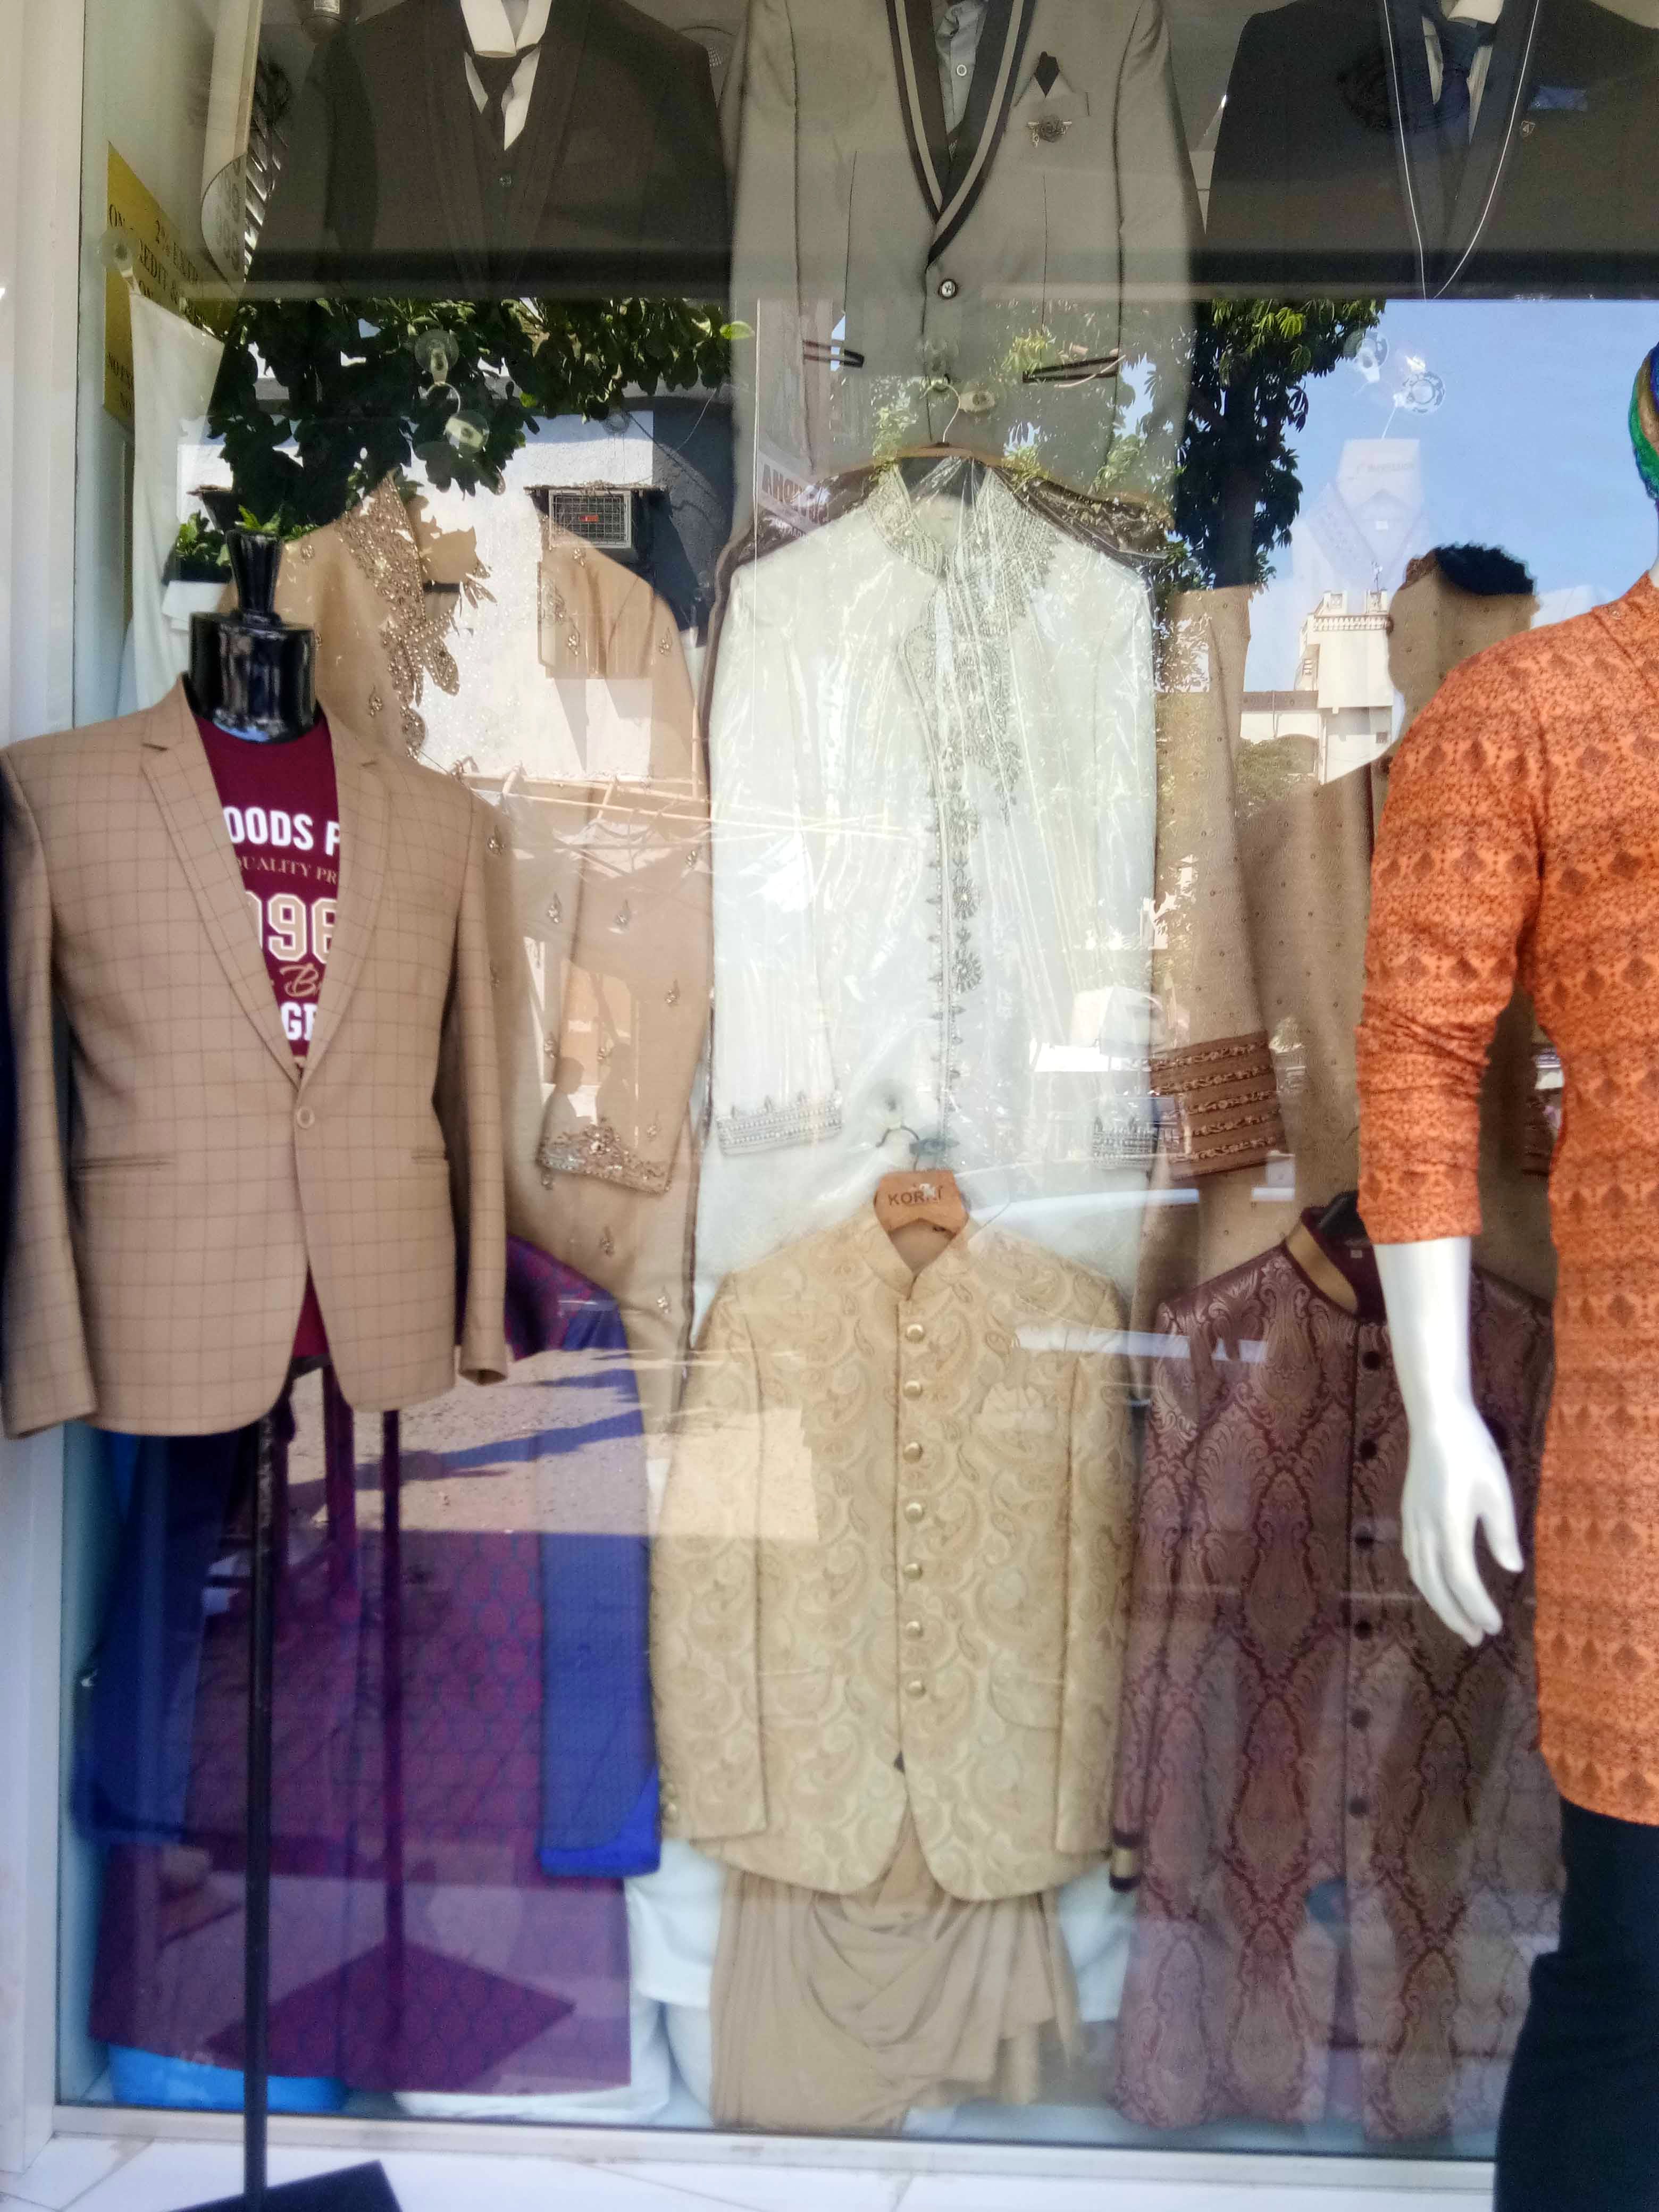 Clothing,Boutique,Display window,Mannequin,Fashion,Outerwear,Jacket,Dress,Suit,Window